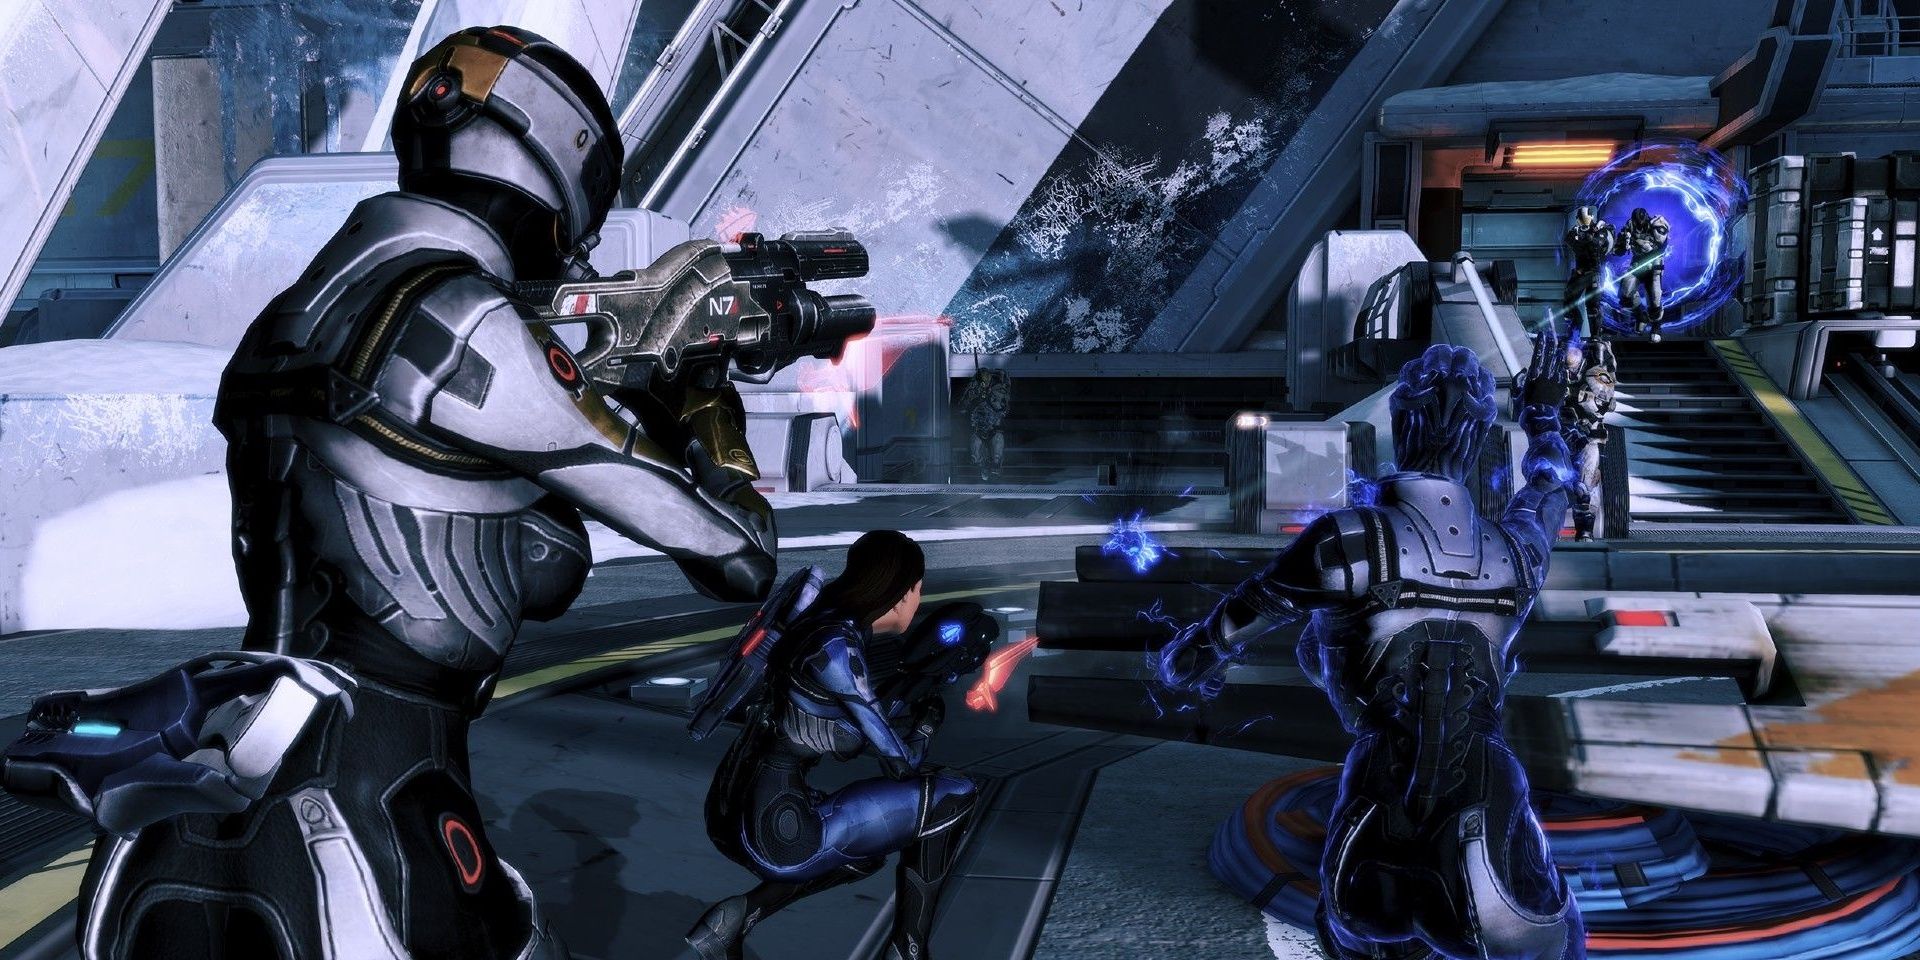 Infiltrator Squad From Mass Effect 3 Featuring Liara & Ashley